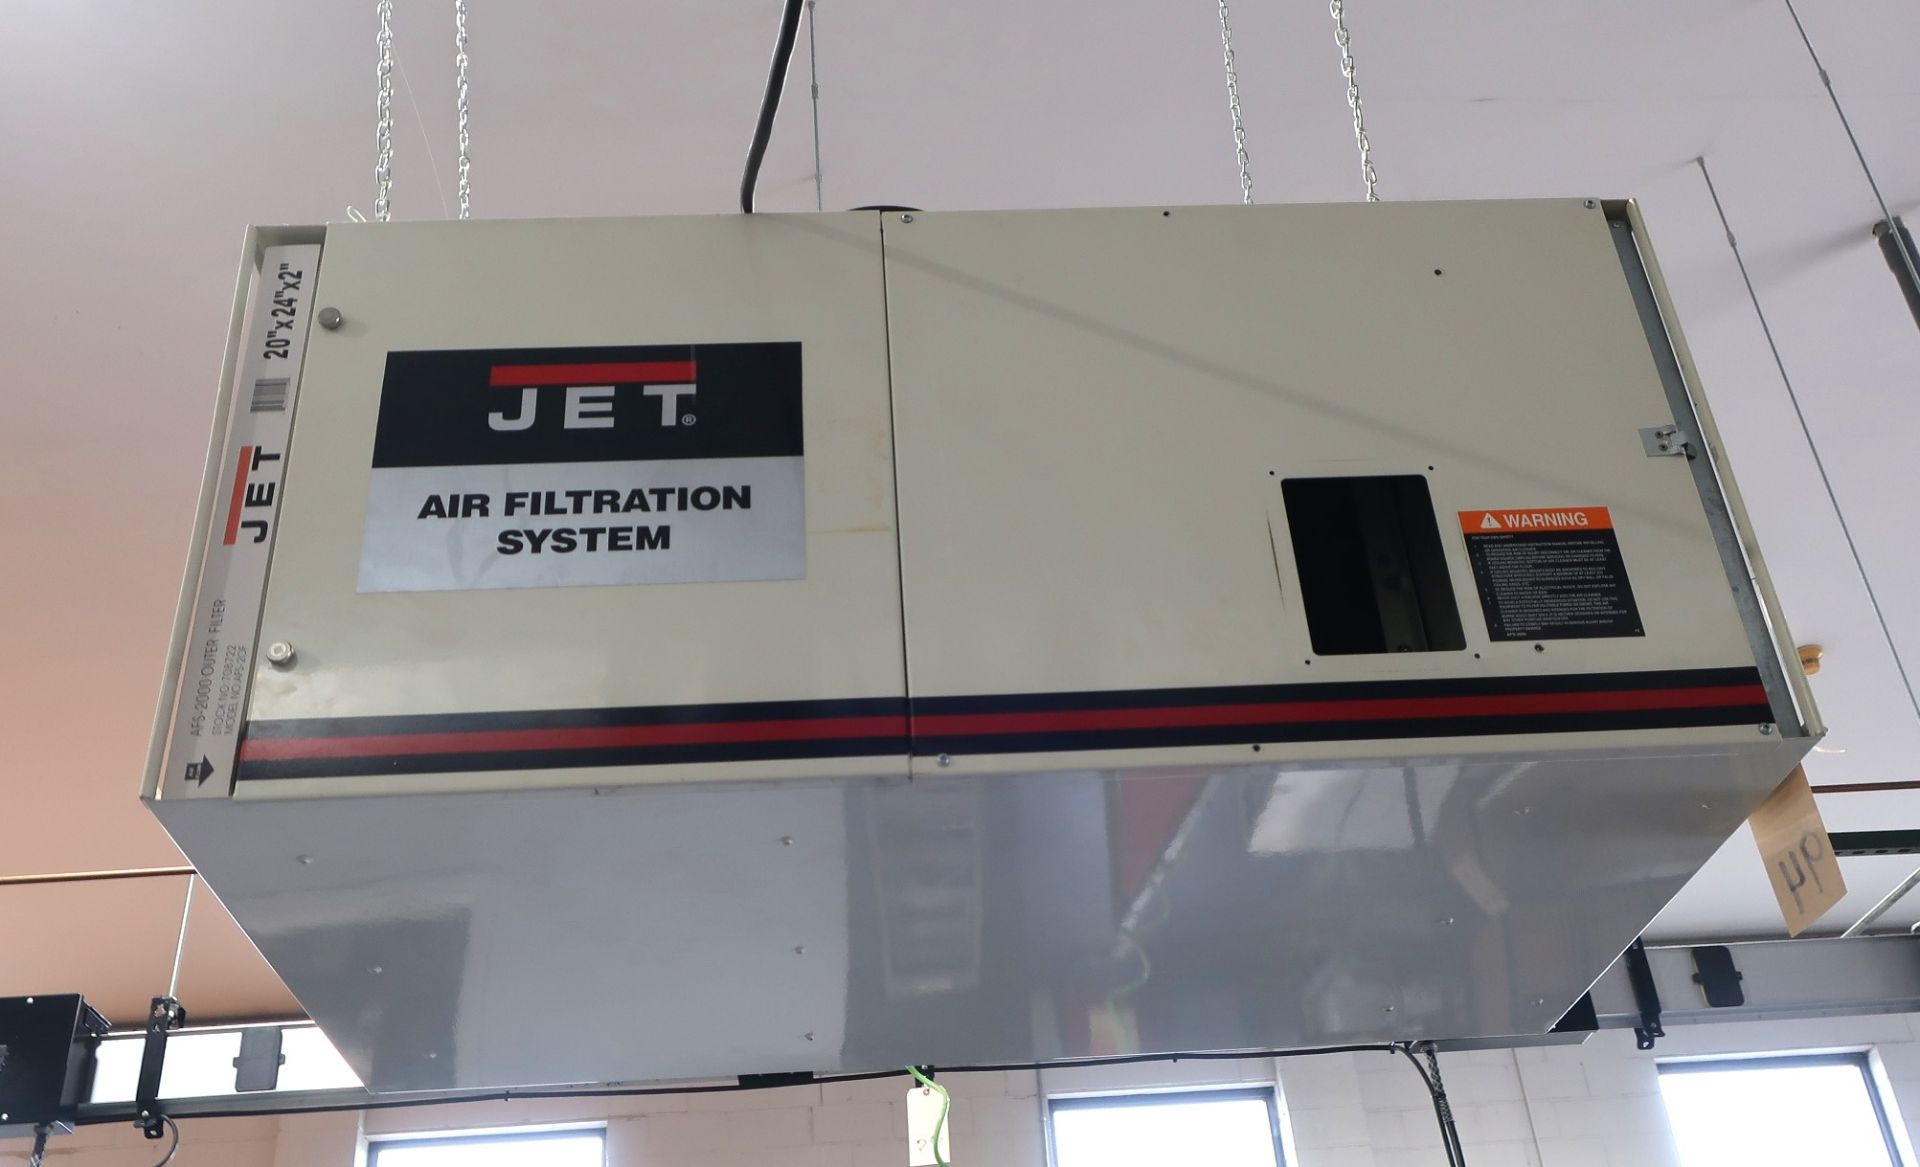 Jet Air Filtration System AFS-2000